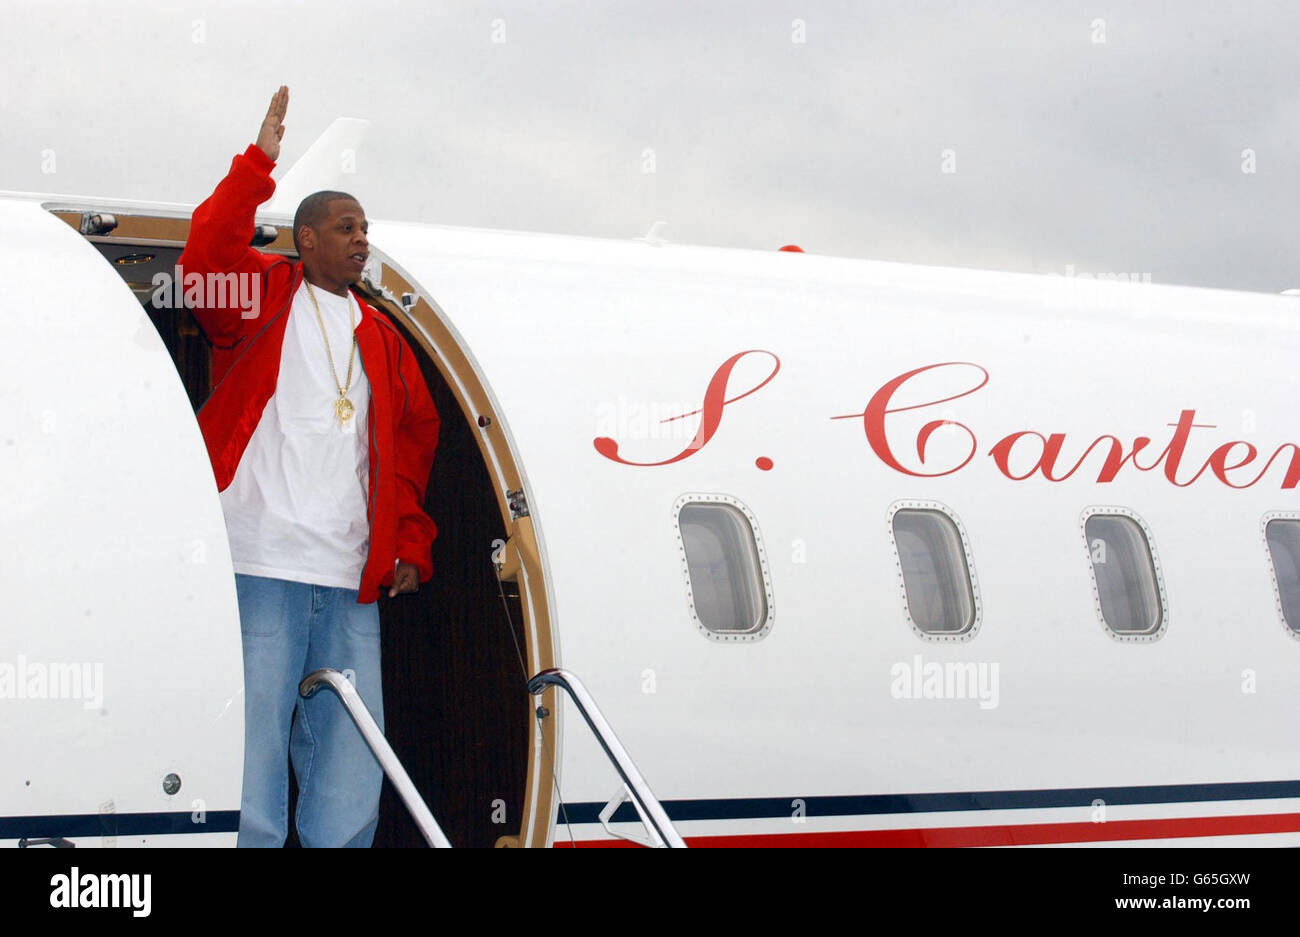 US rapper Jay-Z arriving at Stansted Airport, in a privately chartered jet for the start of his 10-date European Tour. * Jay-Z, is promoting his new duet with Beyonce Knowles, 03 Bonnie And Clyde, out January 20th and lauching a new range of customised Reebok trainers, the S.Carter Collection. Stock Photo